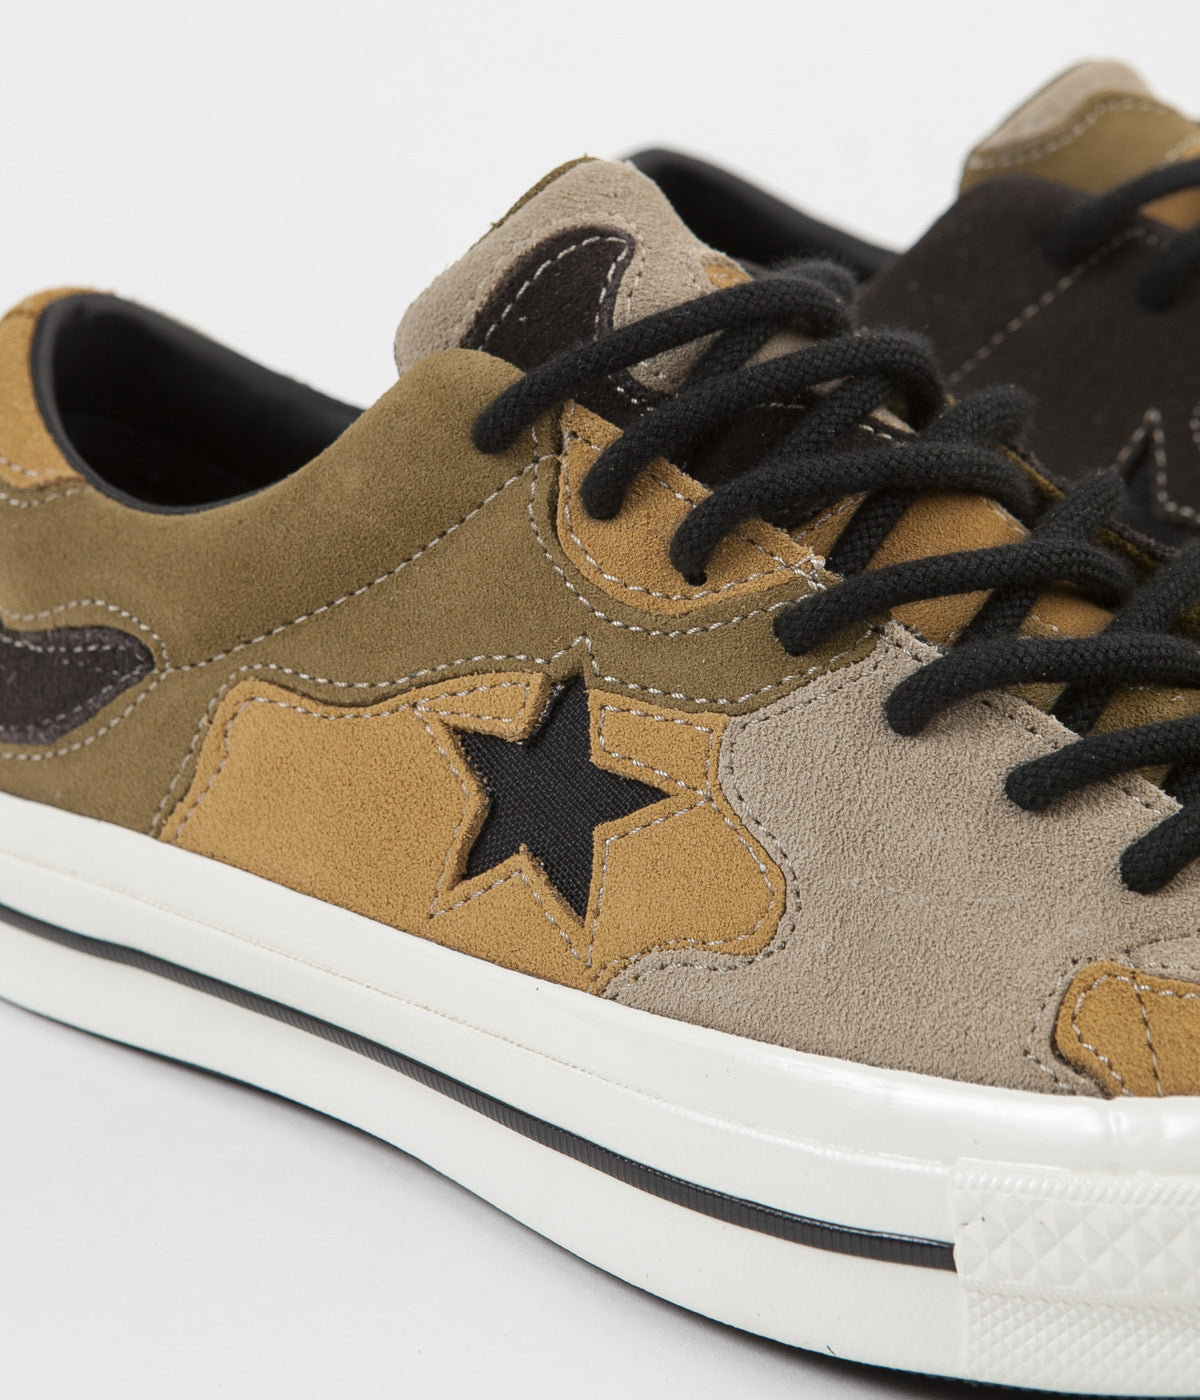 Converse One Star Ox Suede Shoes - Black / Olive Flak / Wheat |